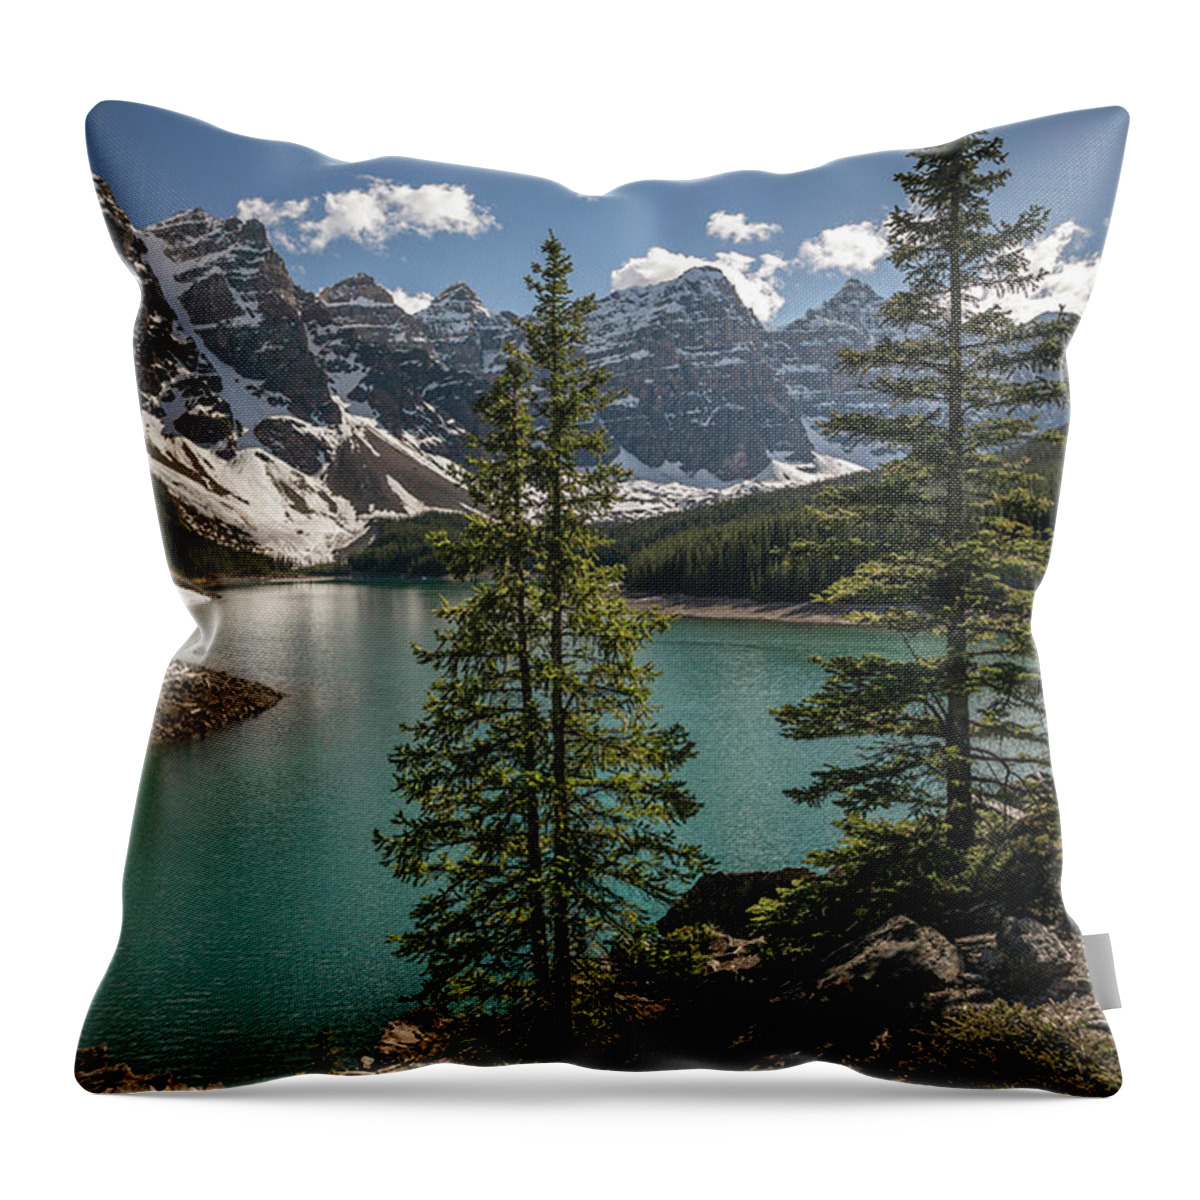 Tranquility Throw Pillow featuring the photograph Moraine Lake by Gemma